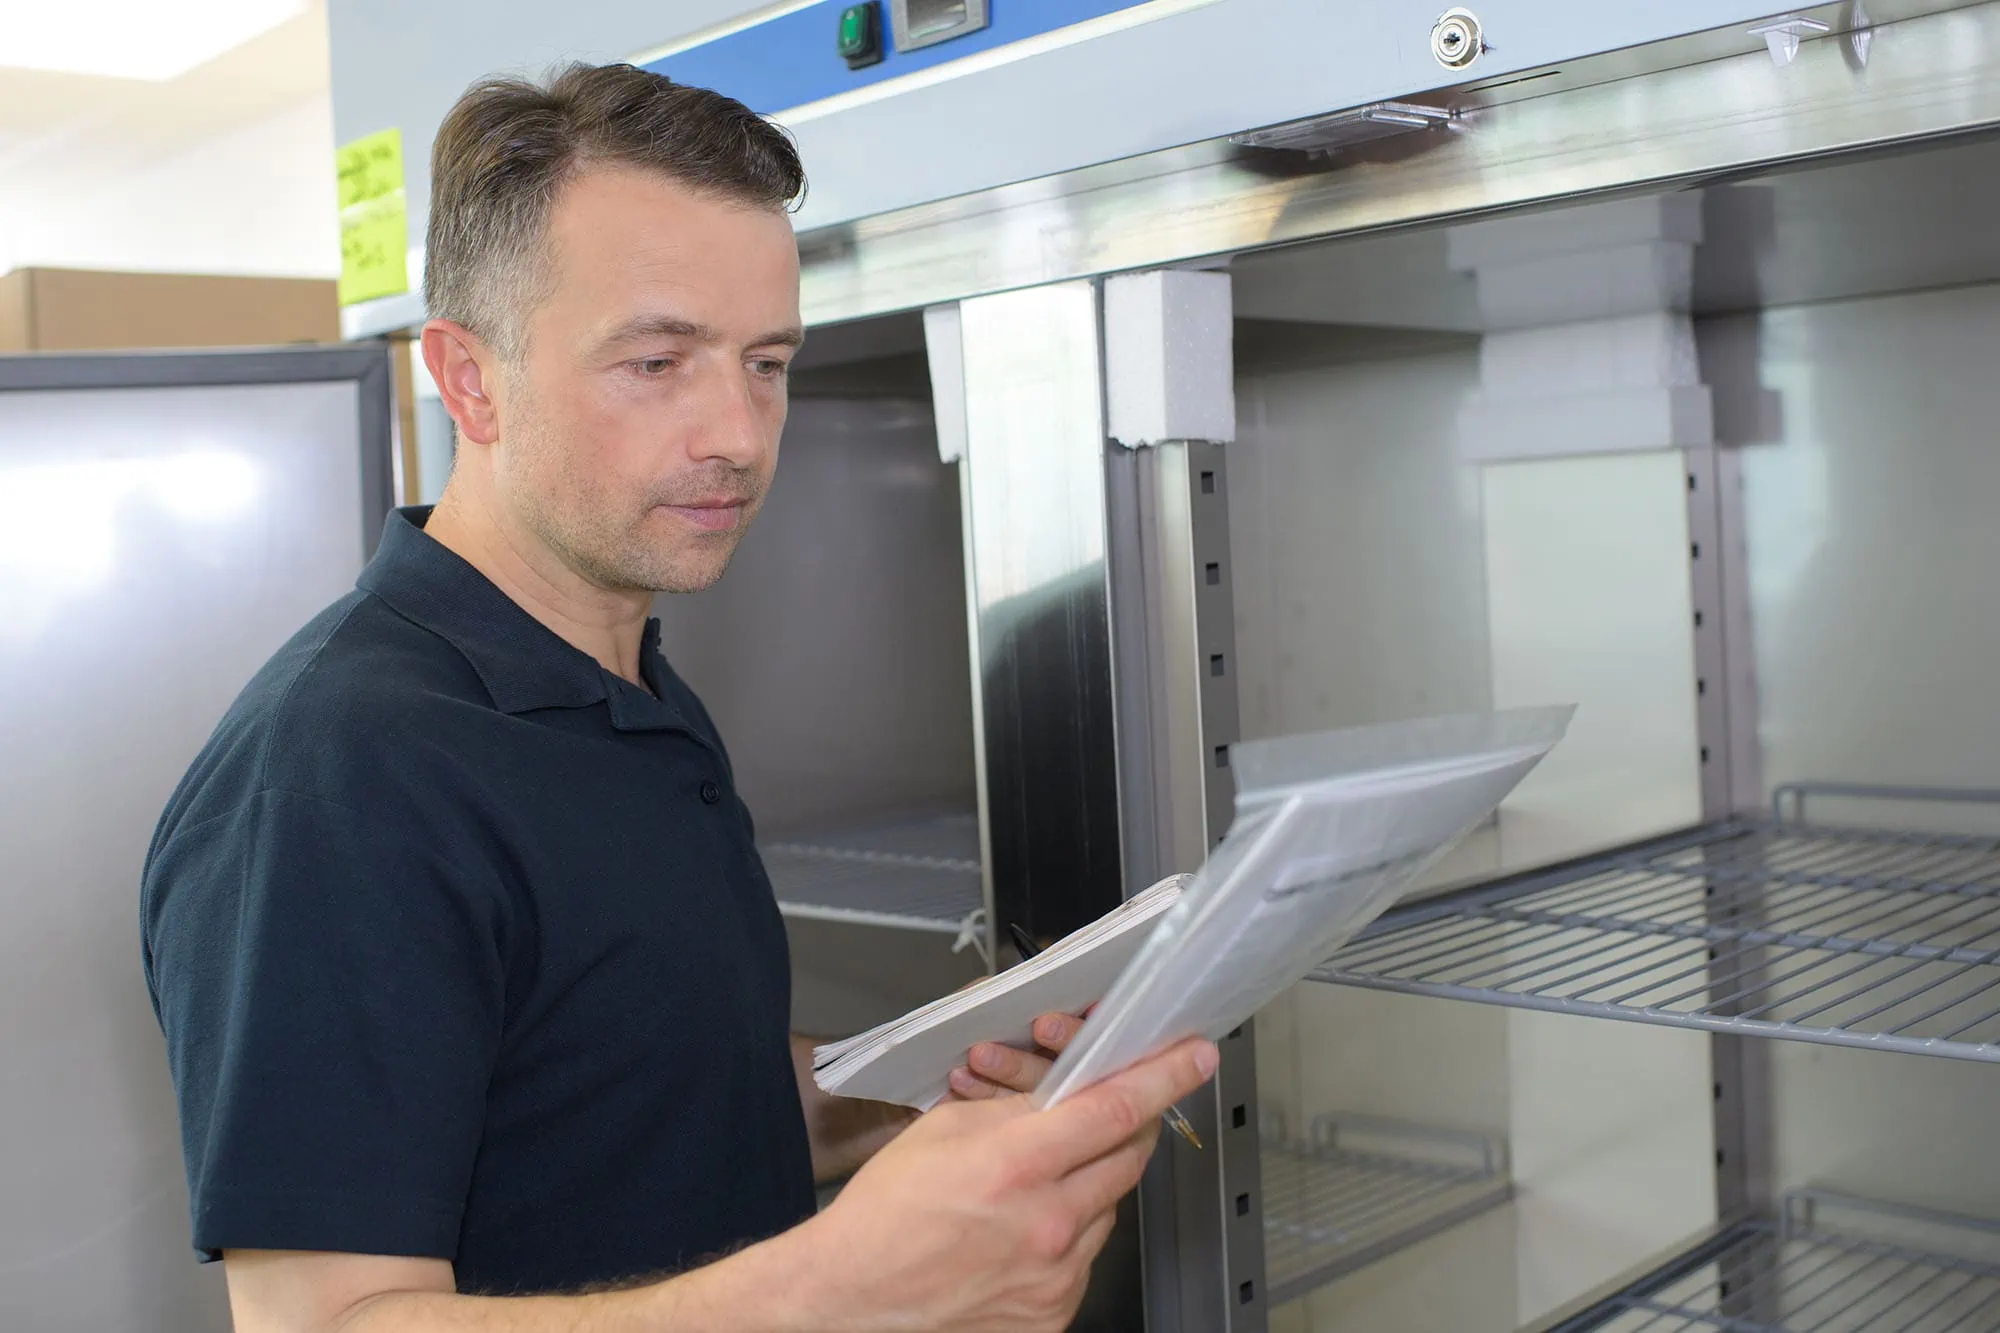 Man consulting a checklist while inspecting a commercial refrigerator